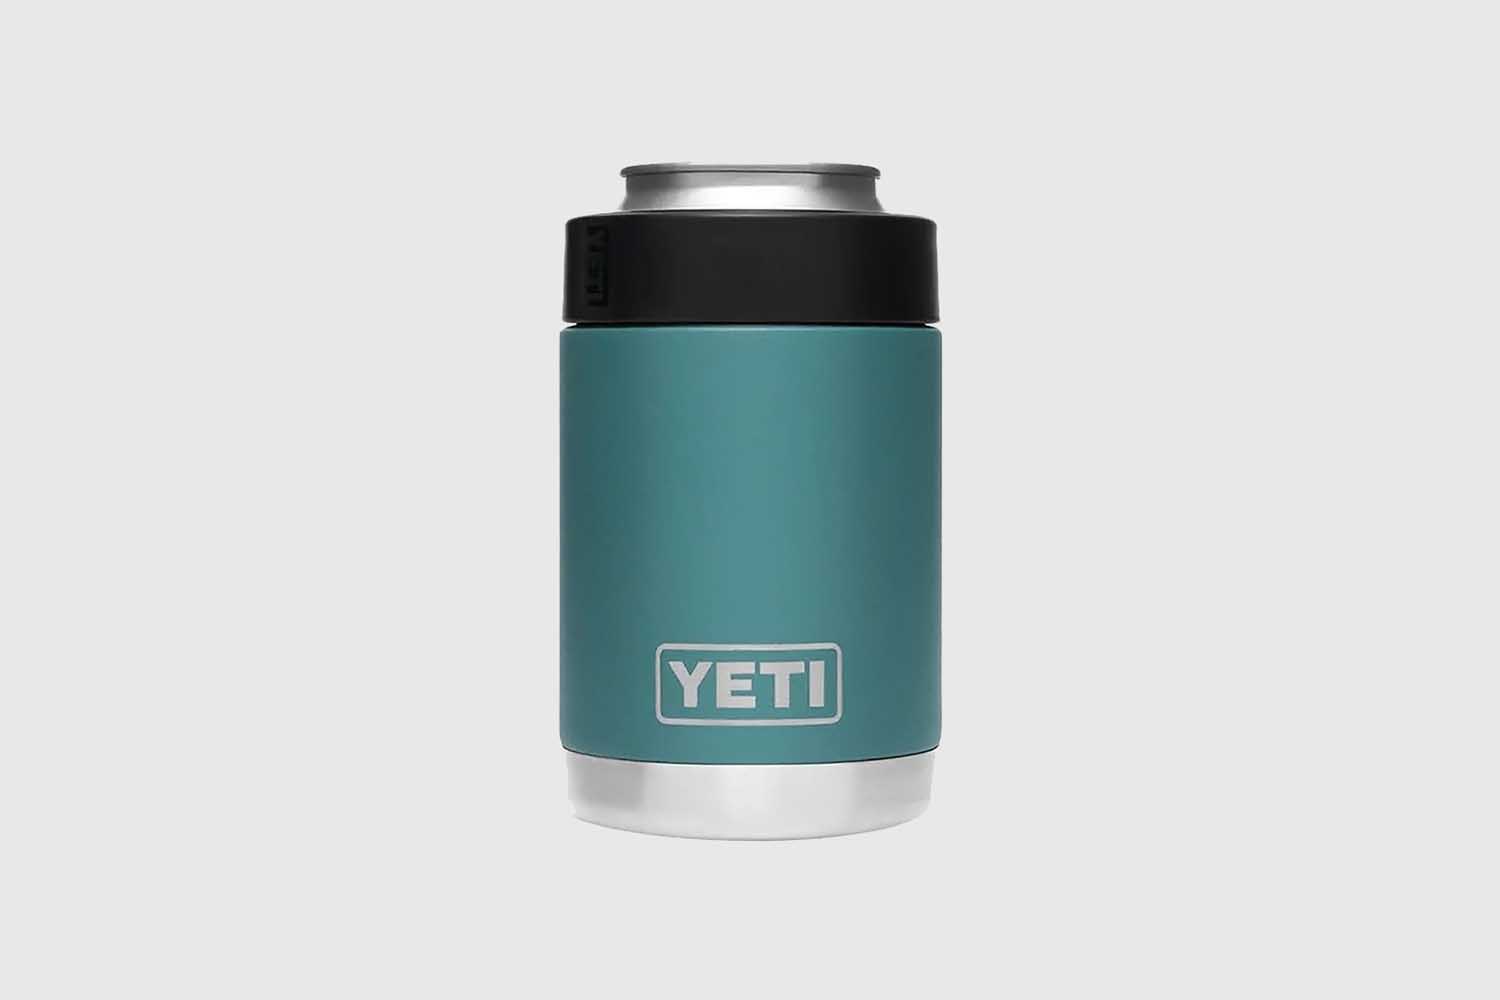 YETI's Must-Have Rambler Colster Is on Sale